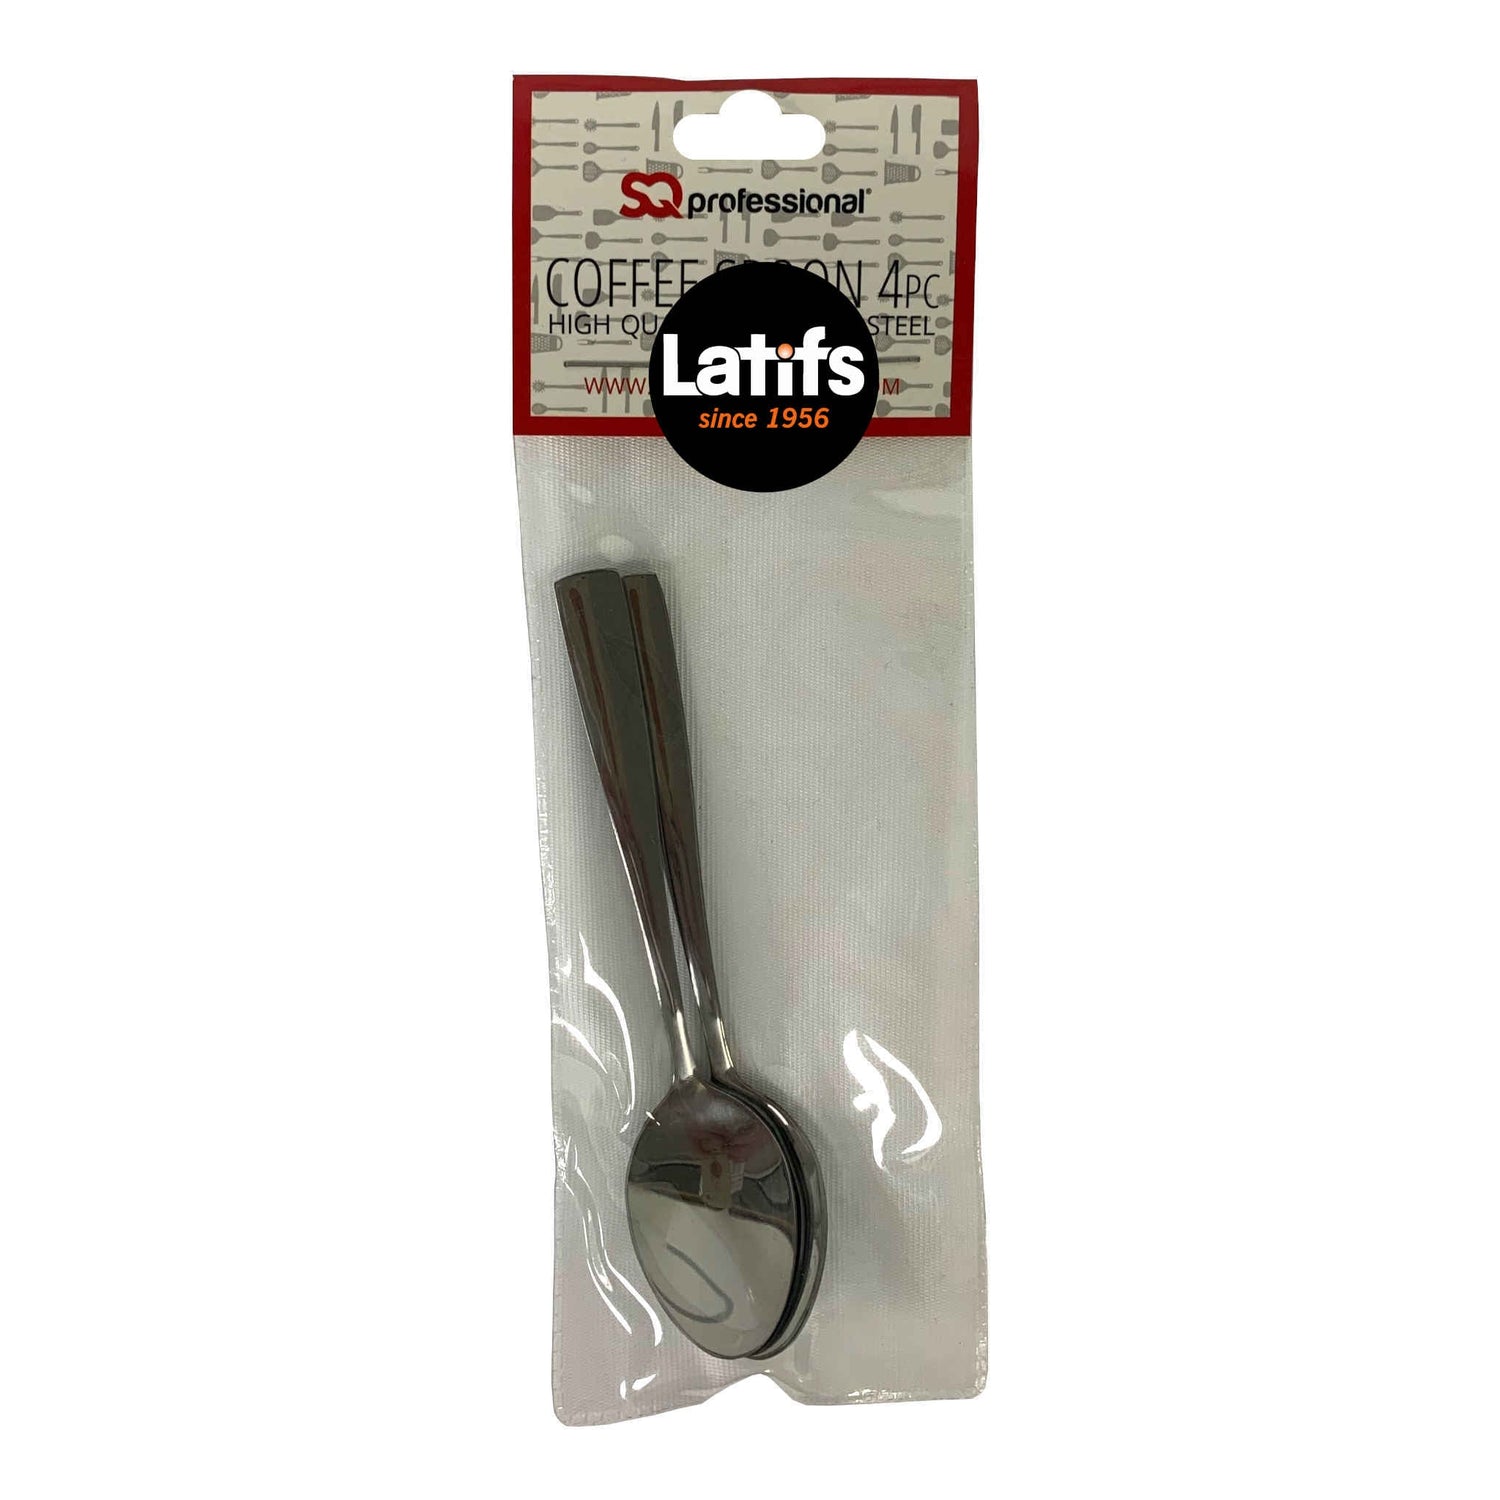 SQ Professional High Quality Coffee Spoon | Stainless Steel | 11cm | 4 Pack